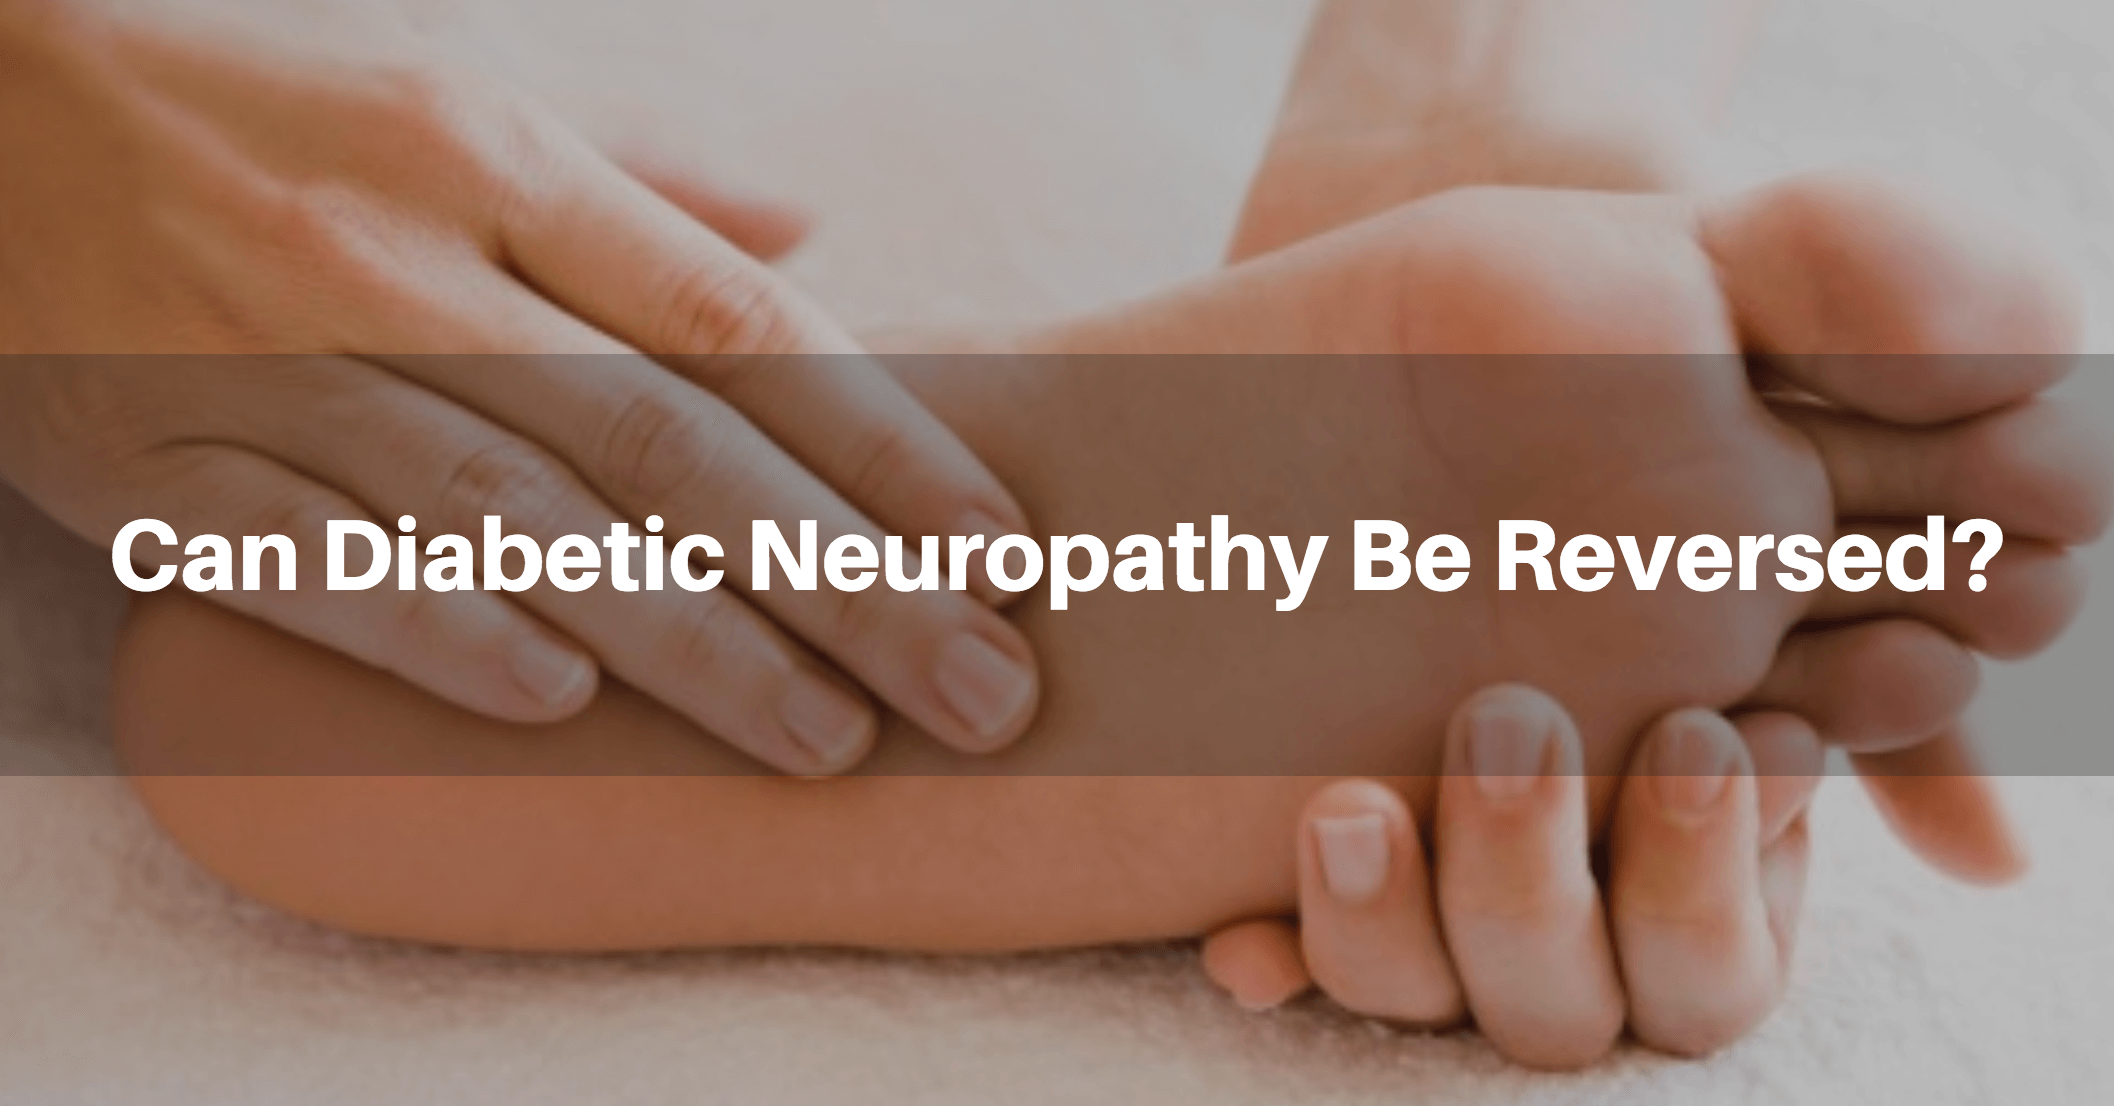 Can Diabetic Neuropathy Be Reversed? A Deep Look Into The Condition